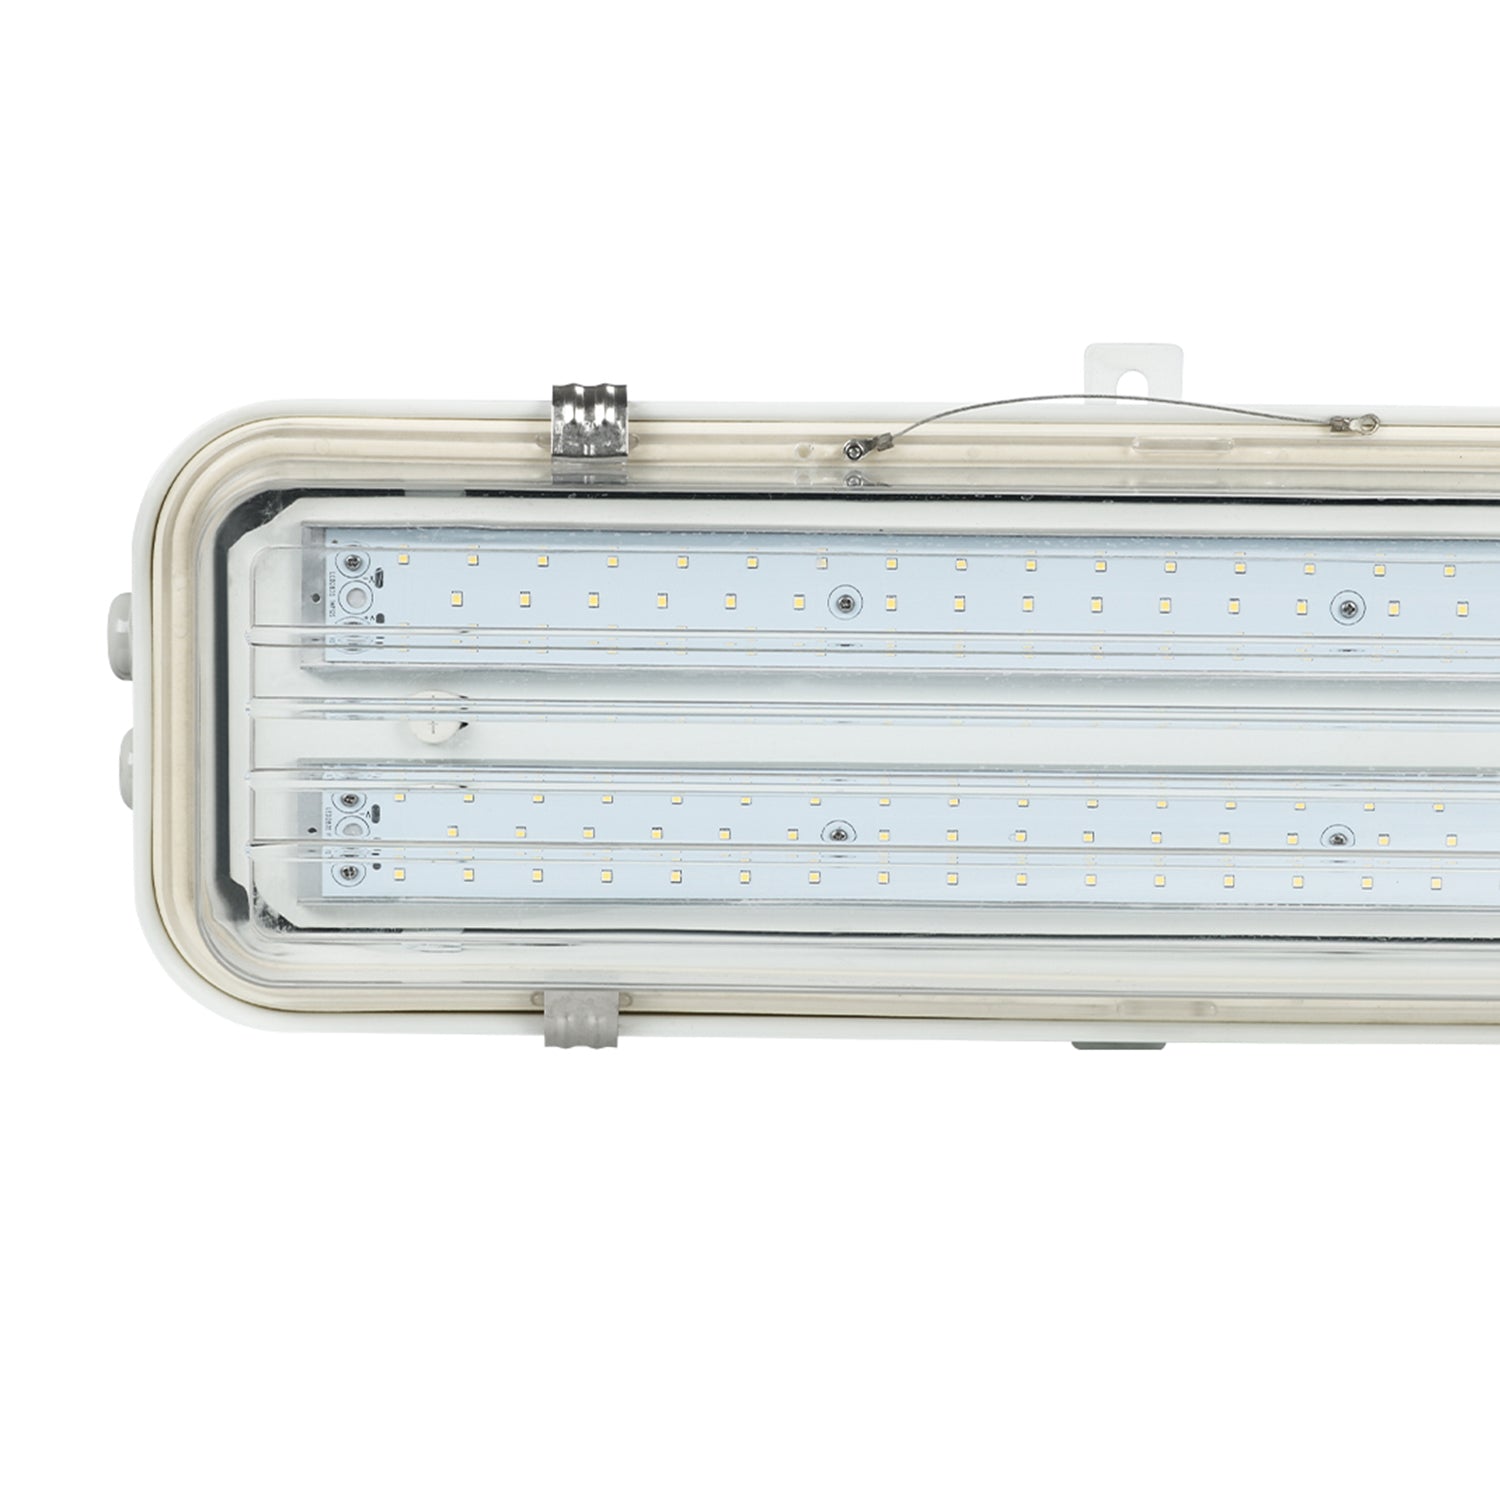 50 Watt 4FT LED Explosion Proof Vapor Proof Light, R Series, Dimmable, 5000K, 7000LM, AC100-277V, IP66, Ideal for Oil & Gas Refineries, Drilling Rigs, Petrochemical Facilities